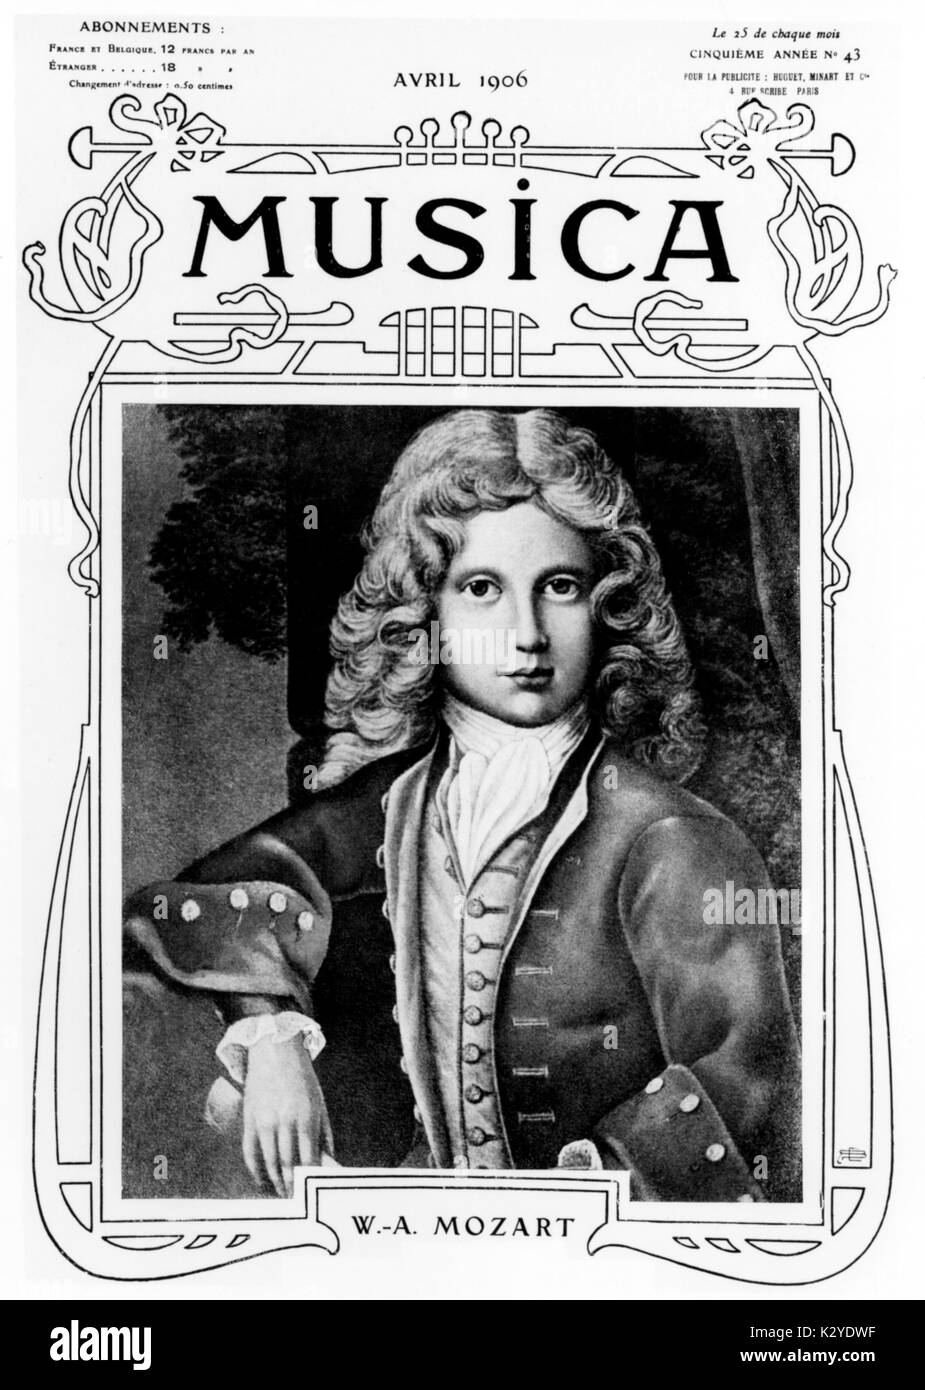 Wolfgang Amadeus Mozart - portrait of the Austrian composer on the cover Musica 1906. 27 January 1756 - 5 December 1791. Stock Photo